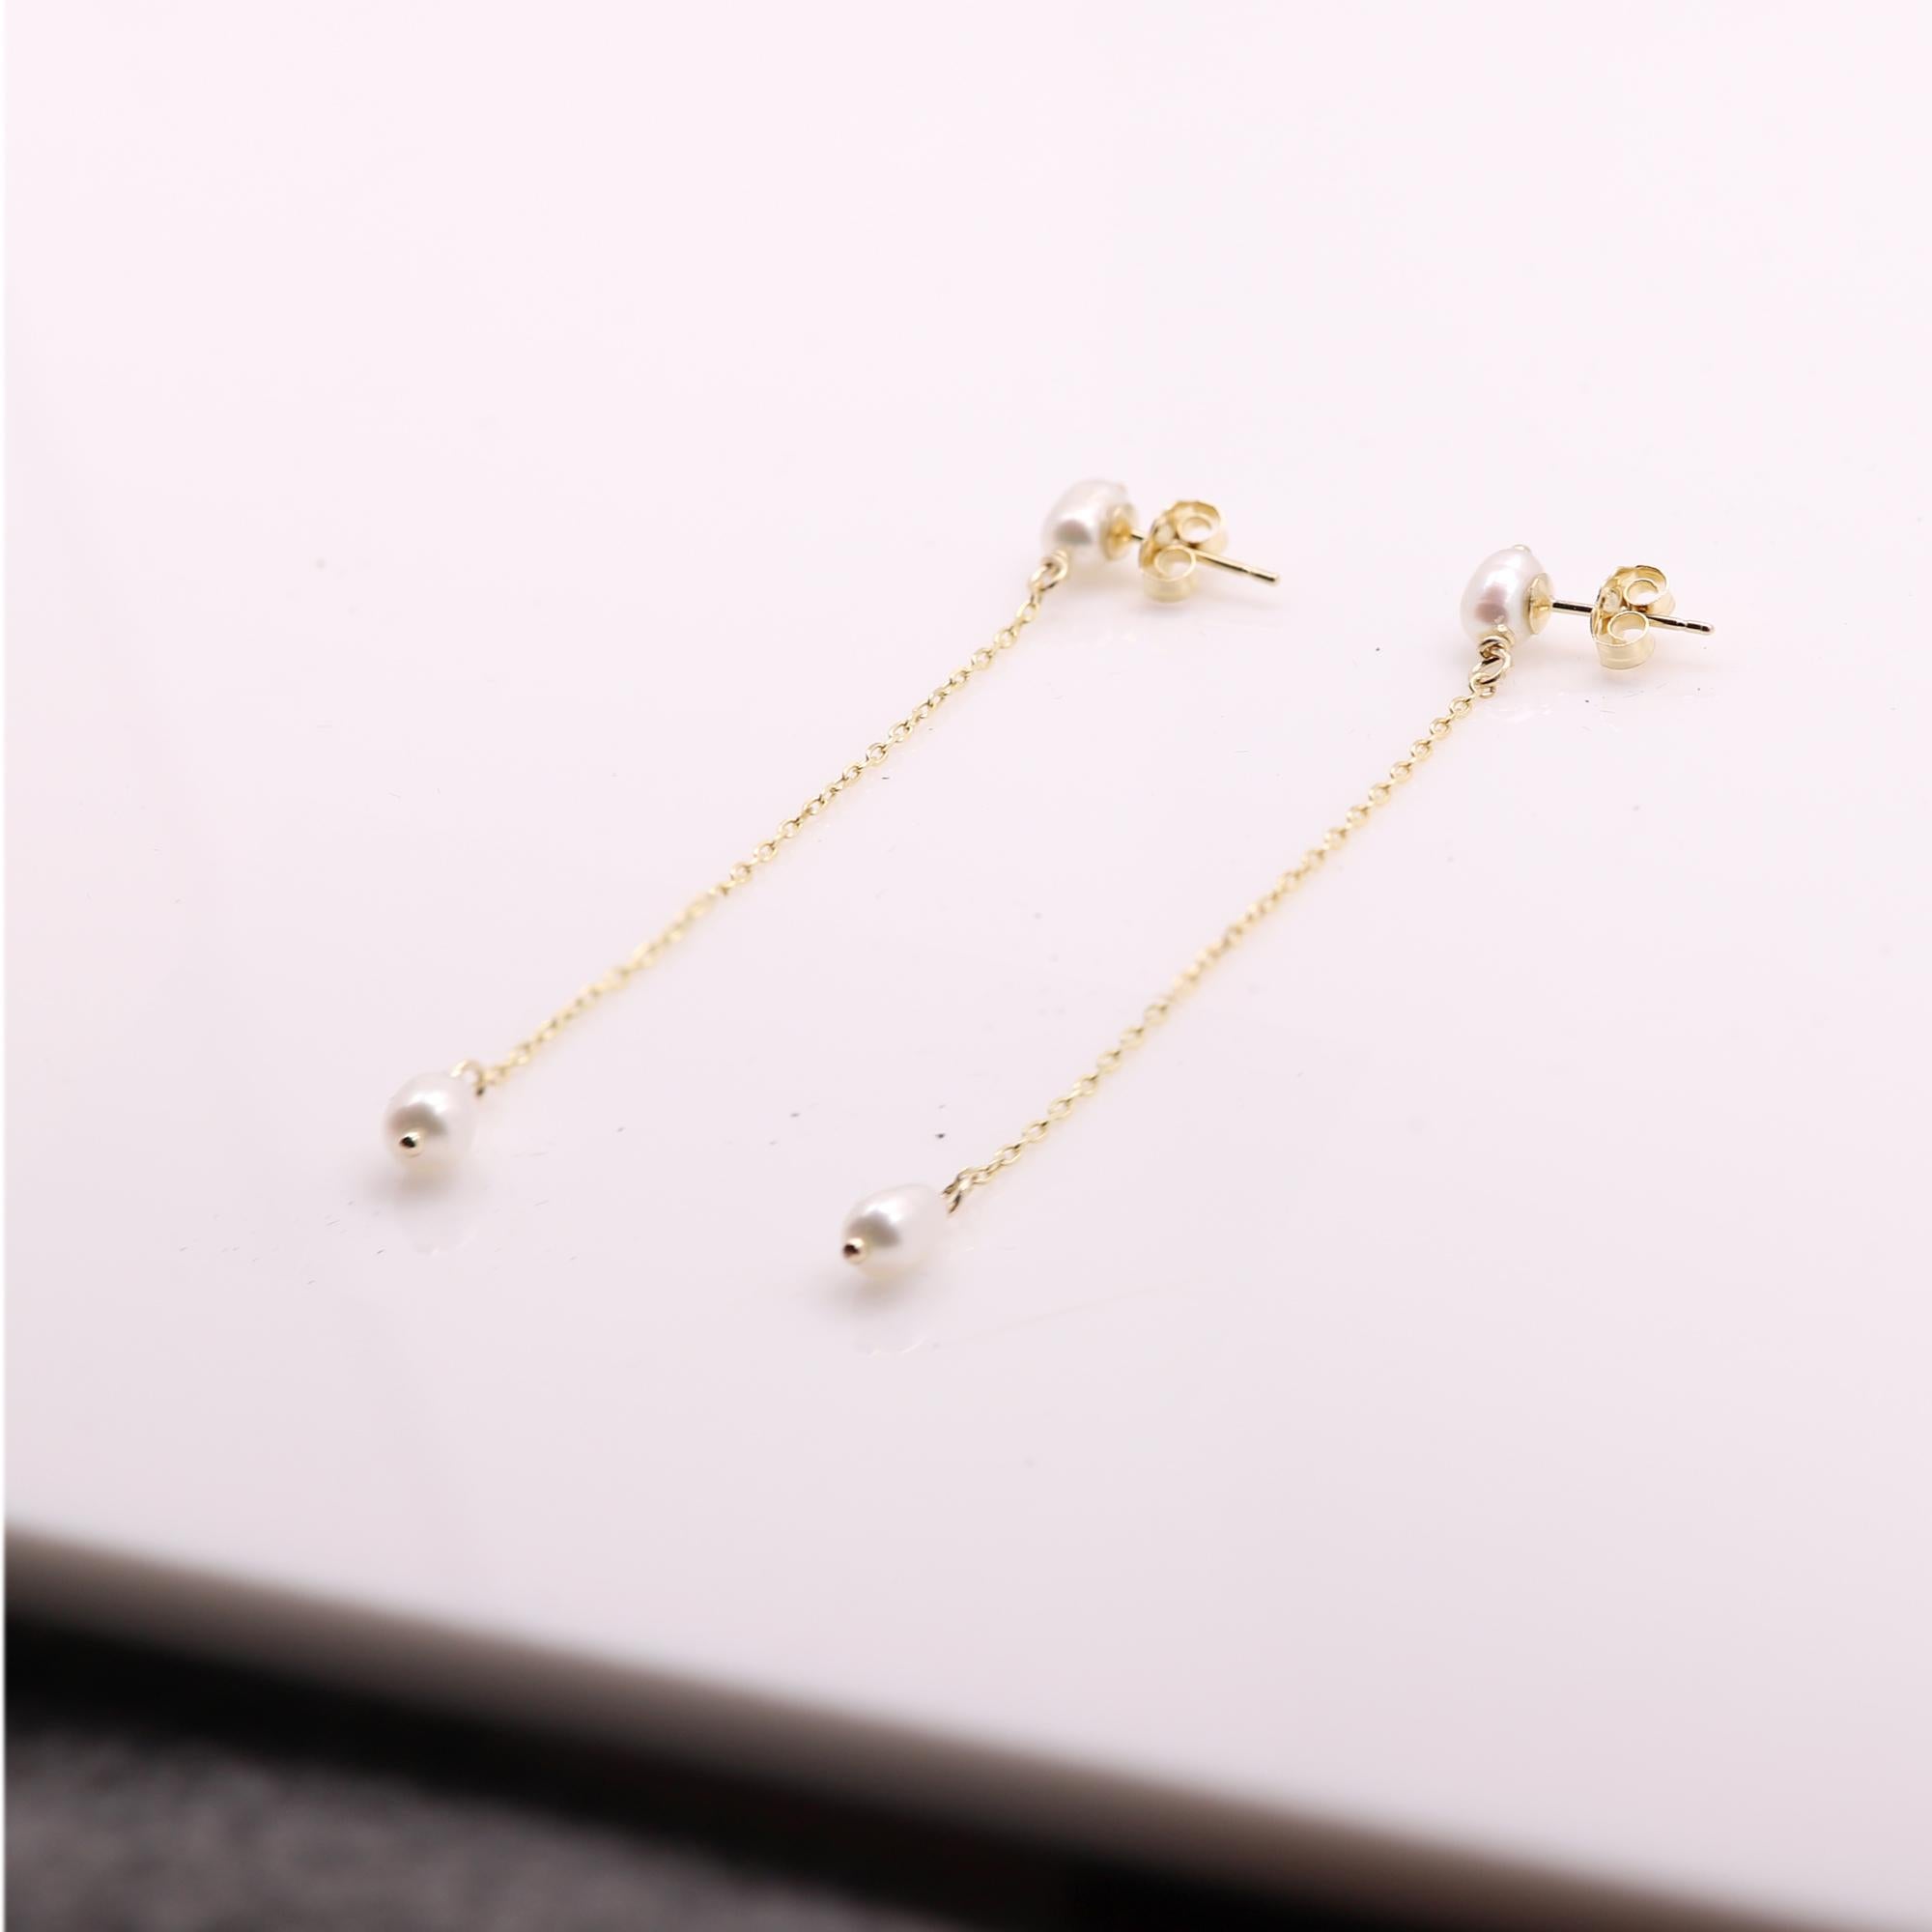 Trendy Elegant dangle earrings 
classic pearls and all 14k  materials
solid 14k yellow gold - all components !
Total weight 6.0 grams 
Length: 2.5' Inch
Butterfly Back
+ Gift Box
Pearl size approx. 6x4 mm
Hand Made in the USA
Chain is a diamond-cut